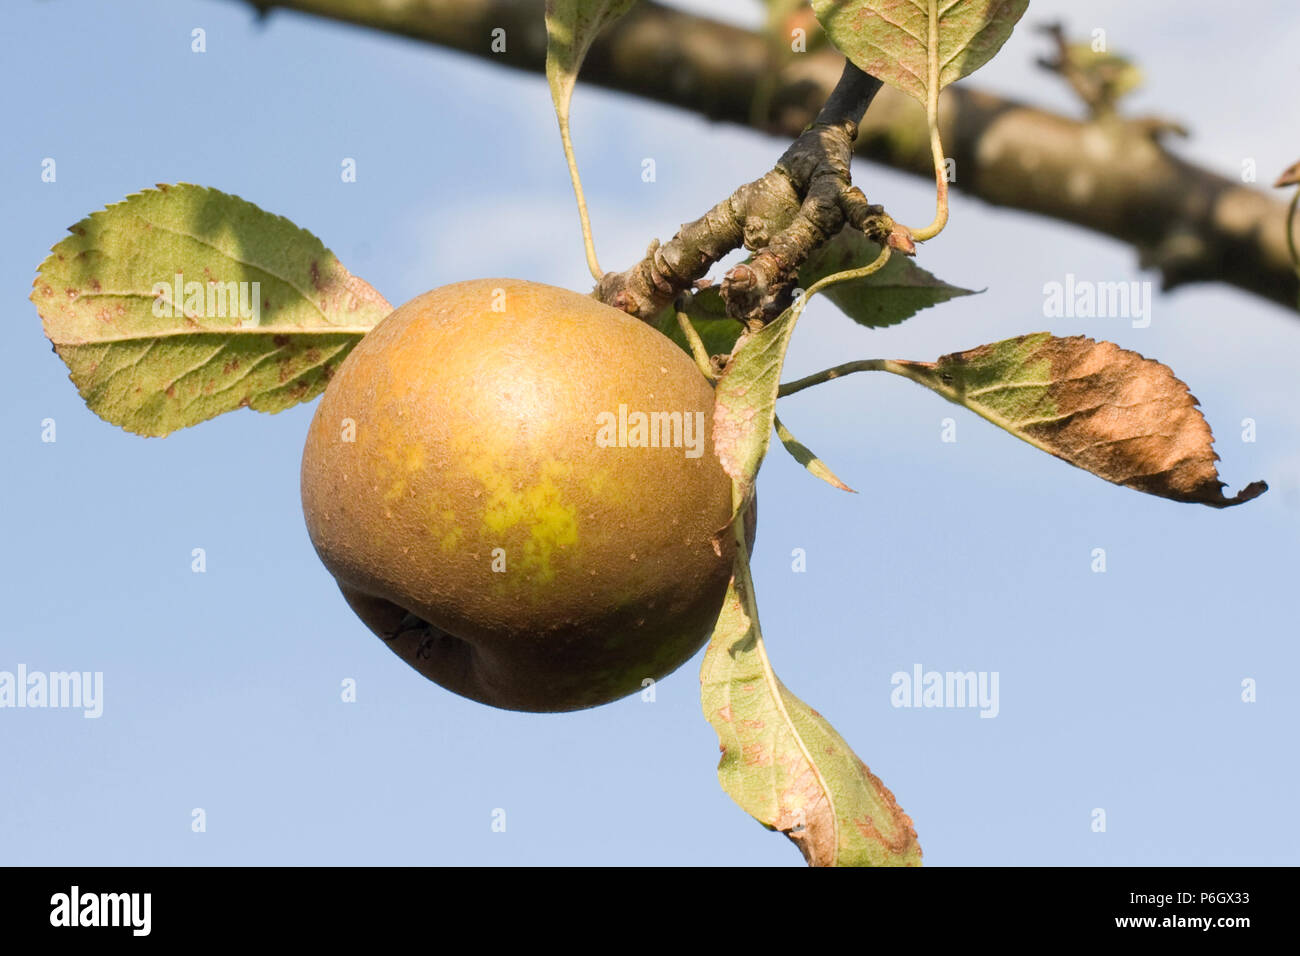 Egremont Russet. Dessert apple. Ripe fruit on a tree in an organic orchard in Bristol. Stock Photo